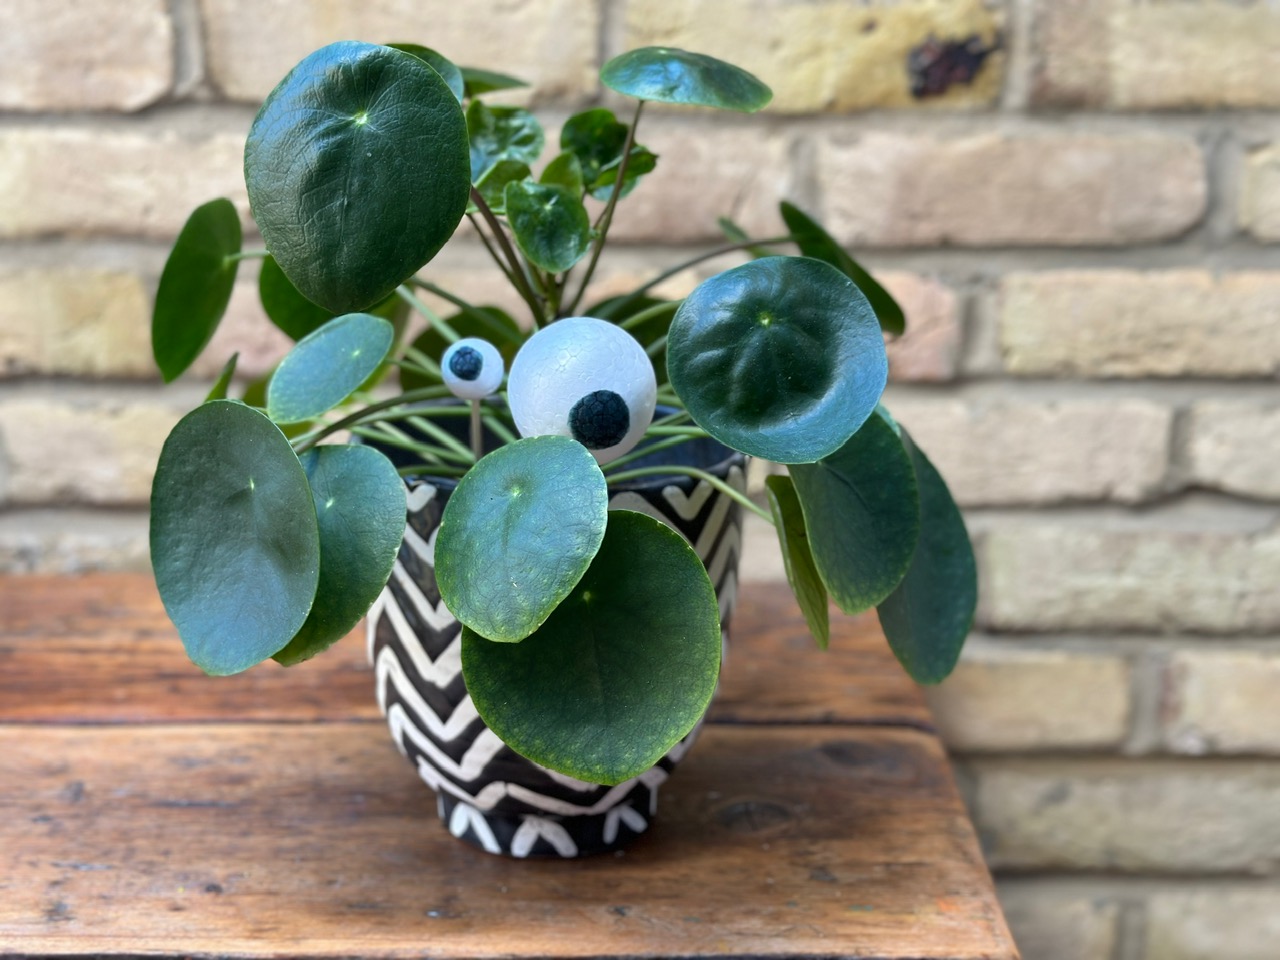 How to make googly eyes for plants